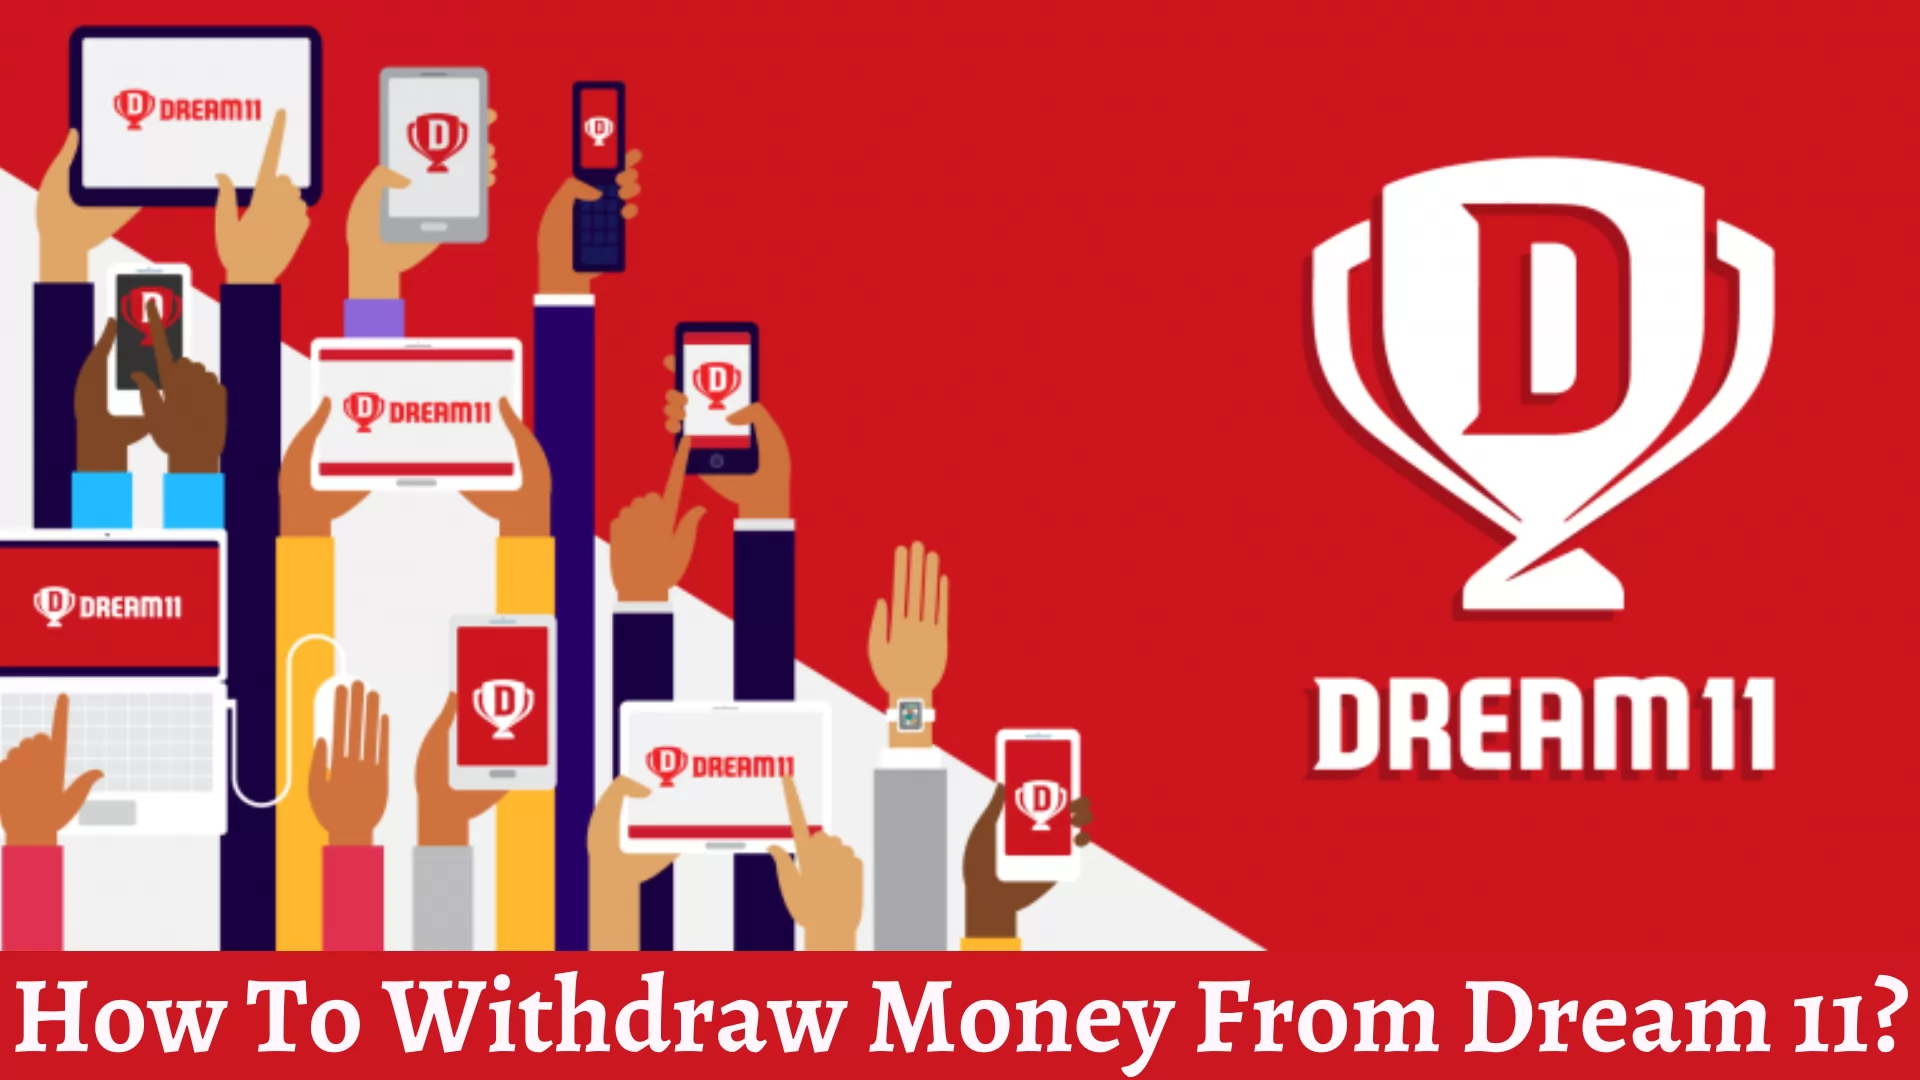 How To Withdraw Money From Dream11?